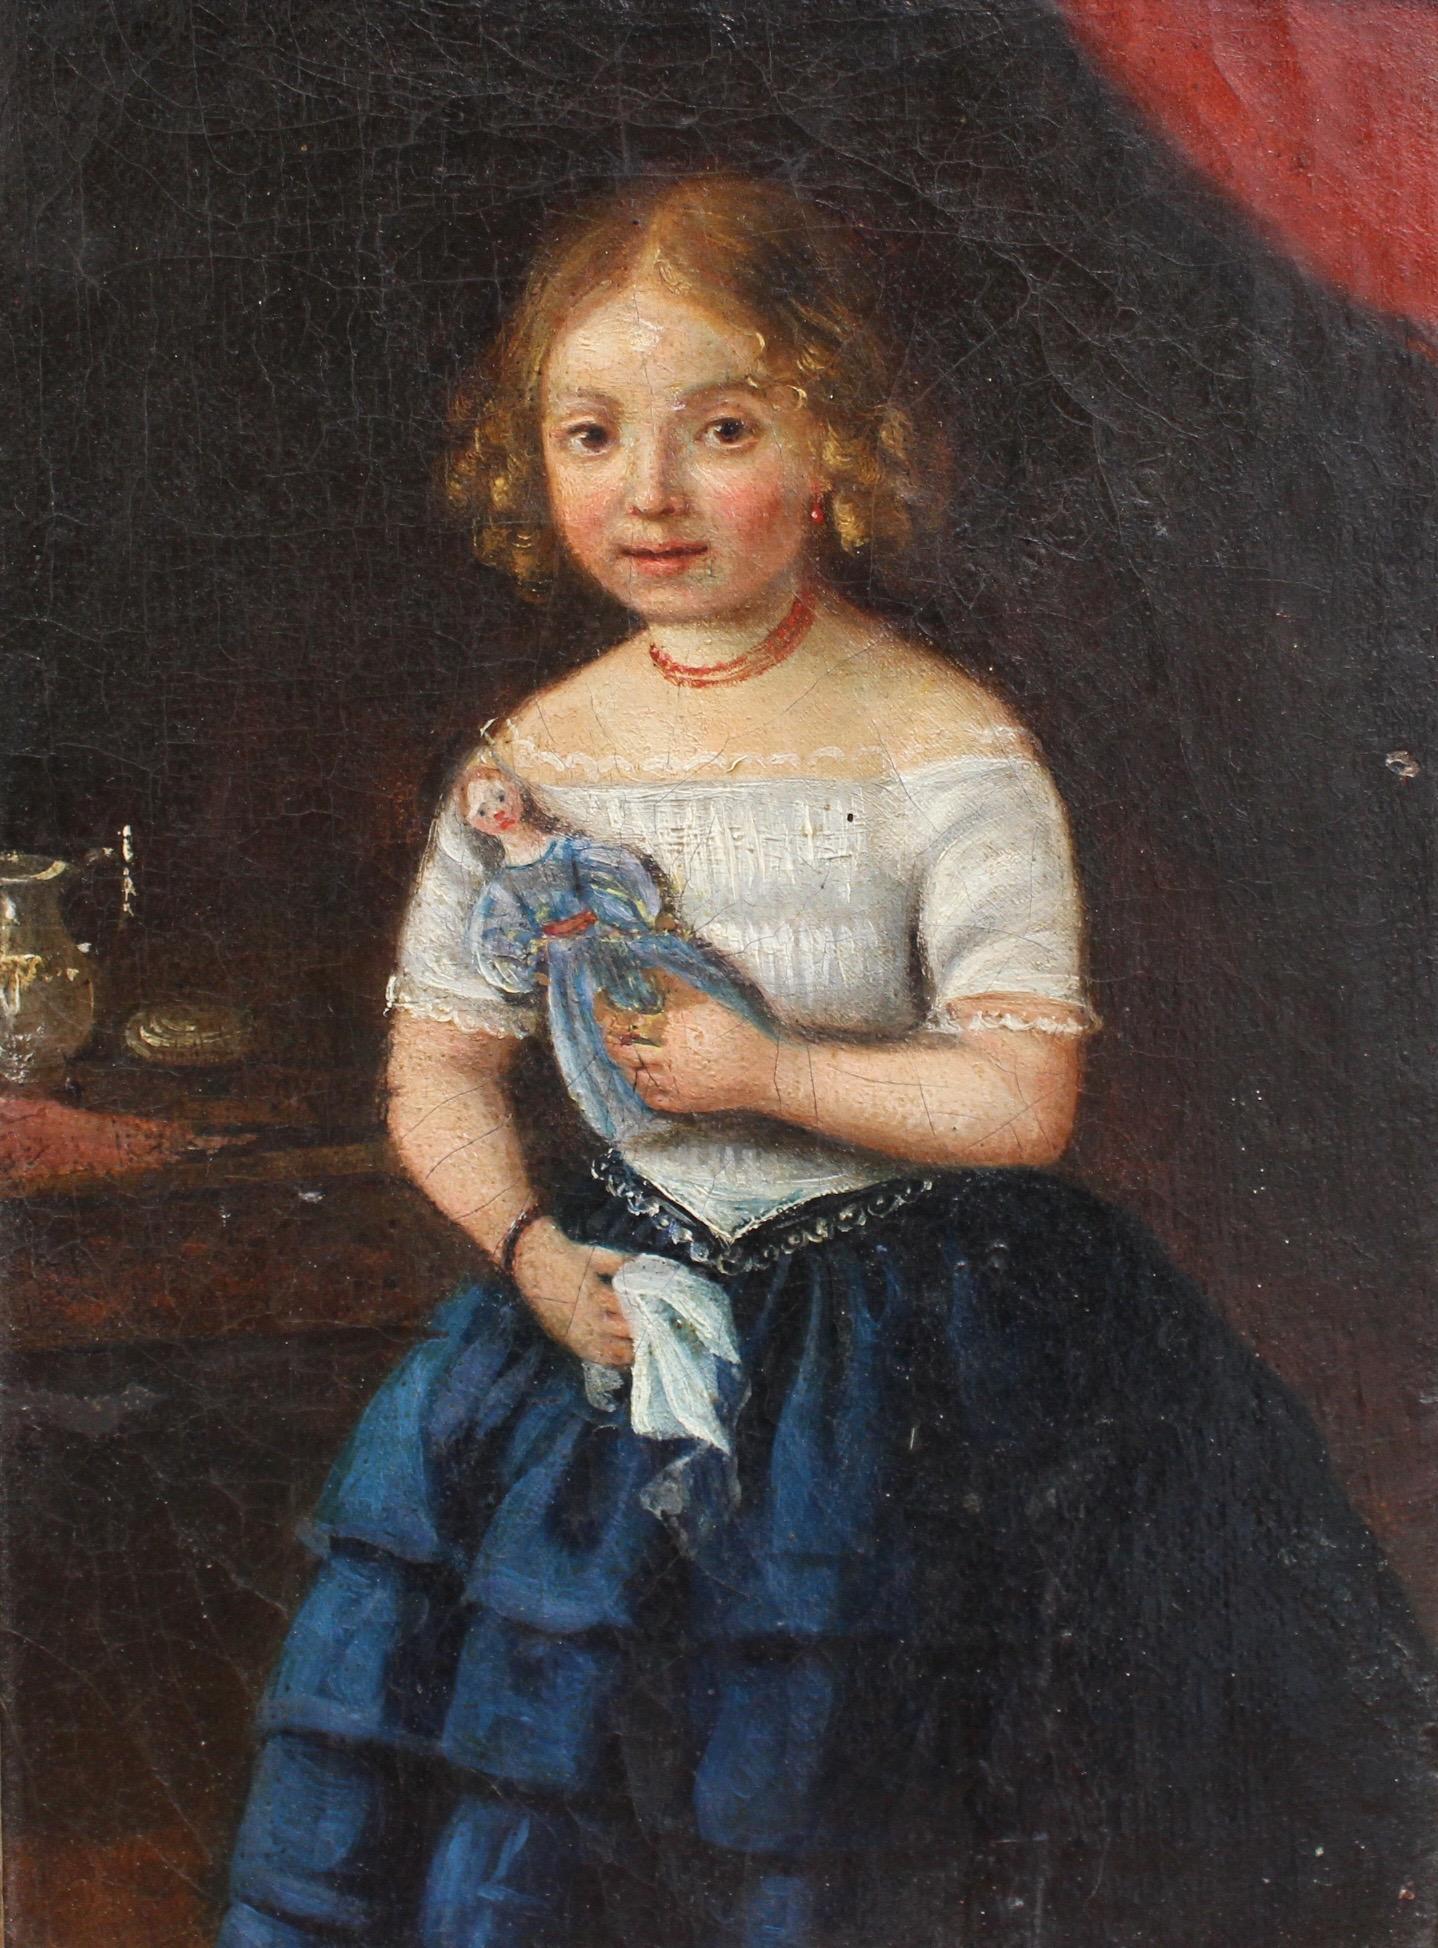 Unknown Portrait Painting - 'Young Girl with Her Doll' (Late 18th Century)